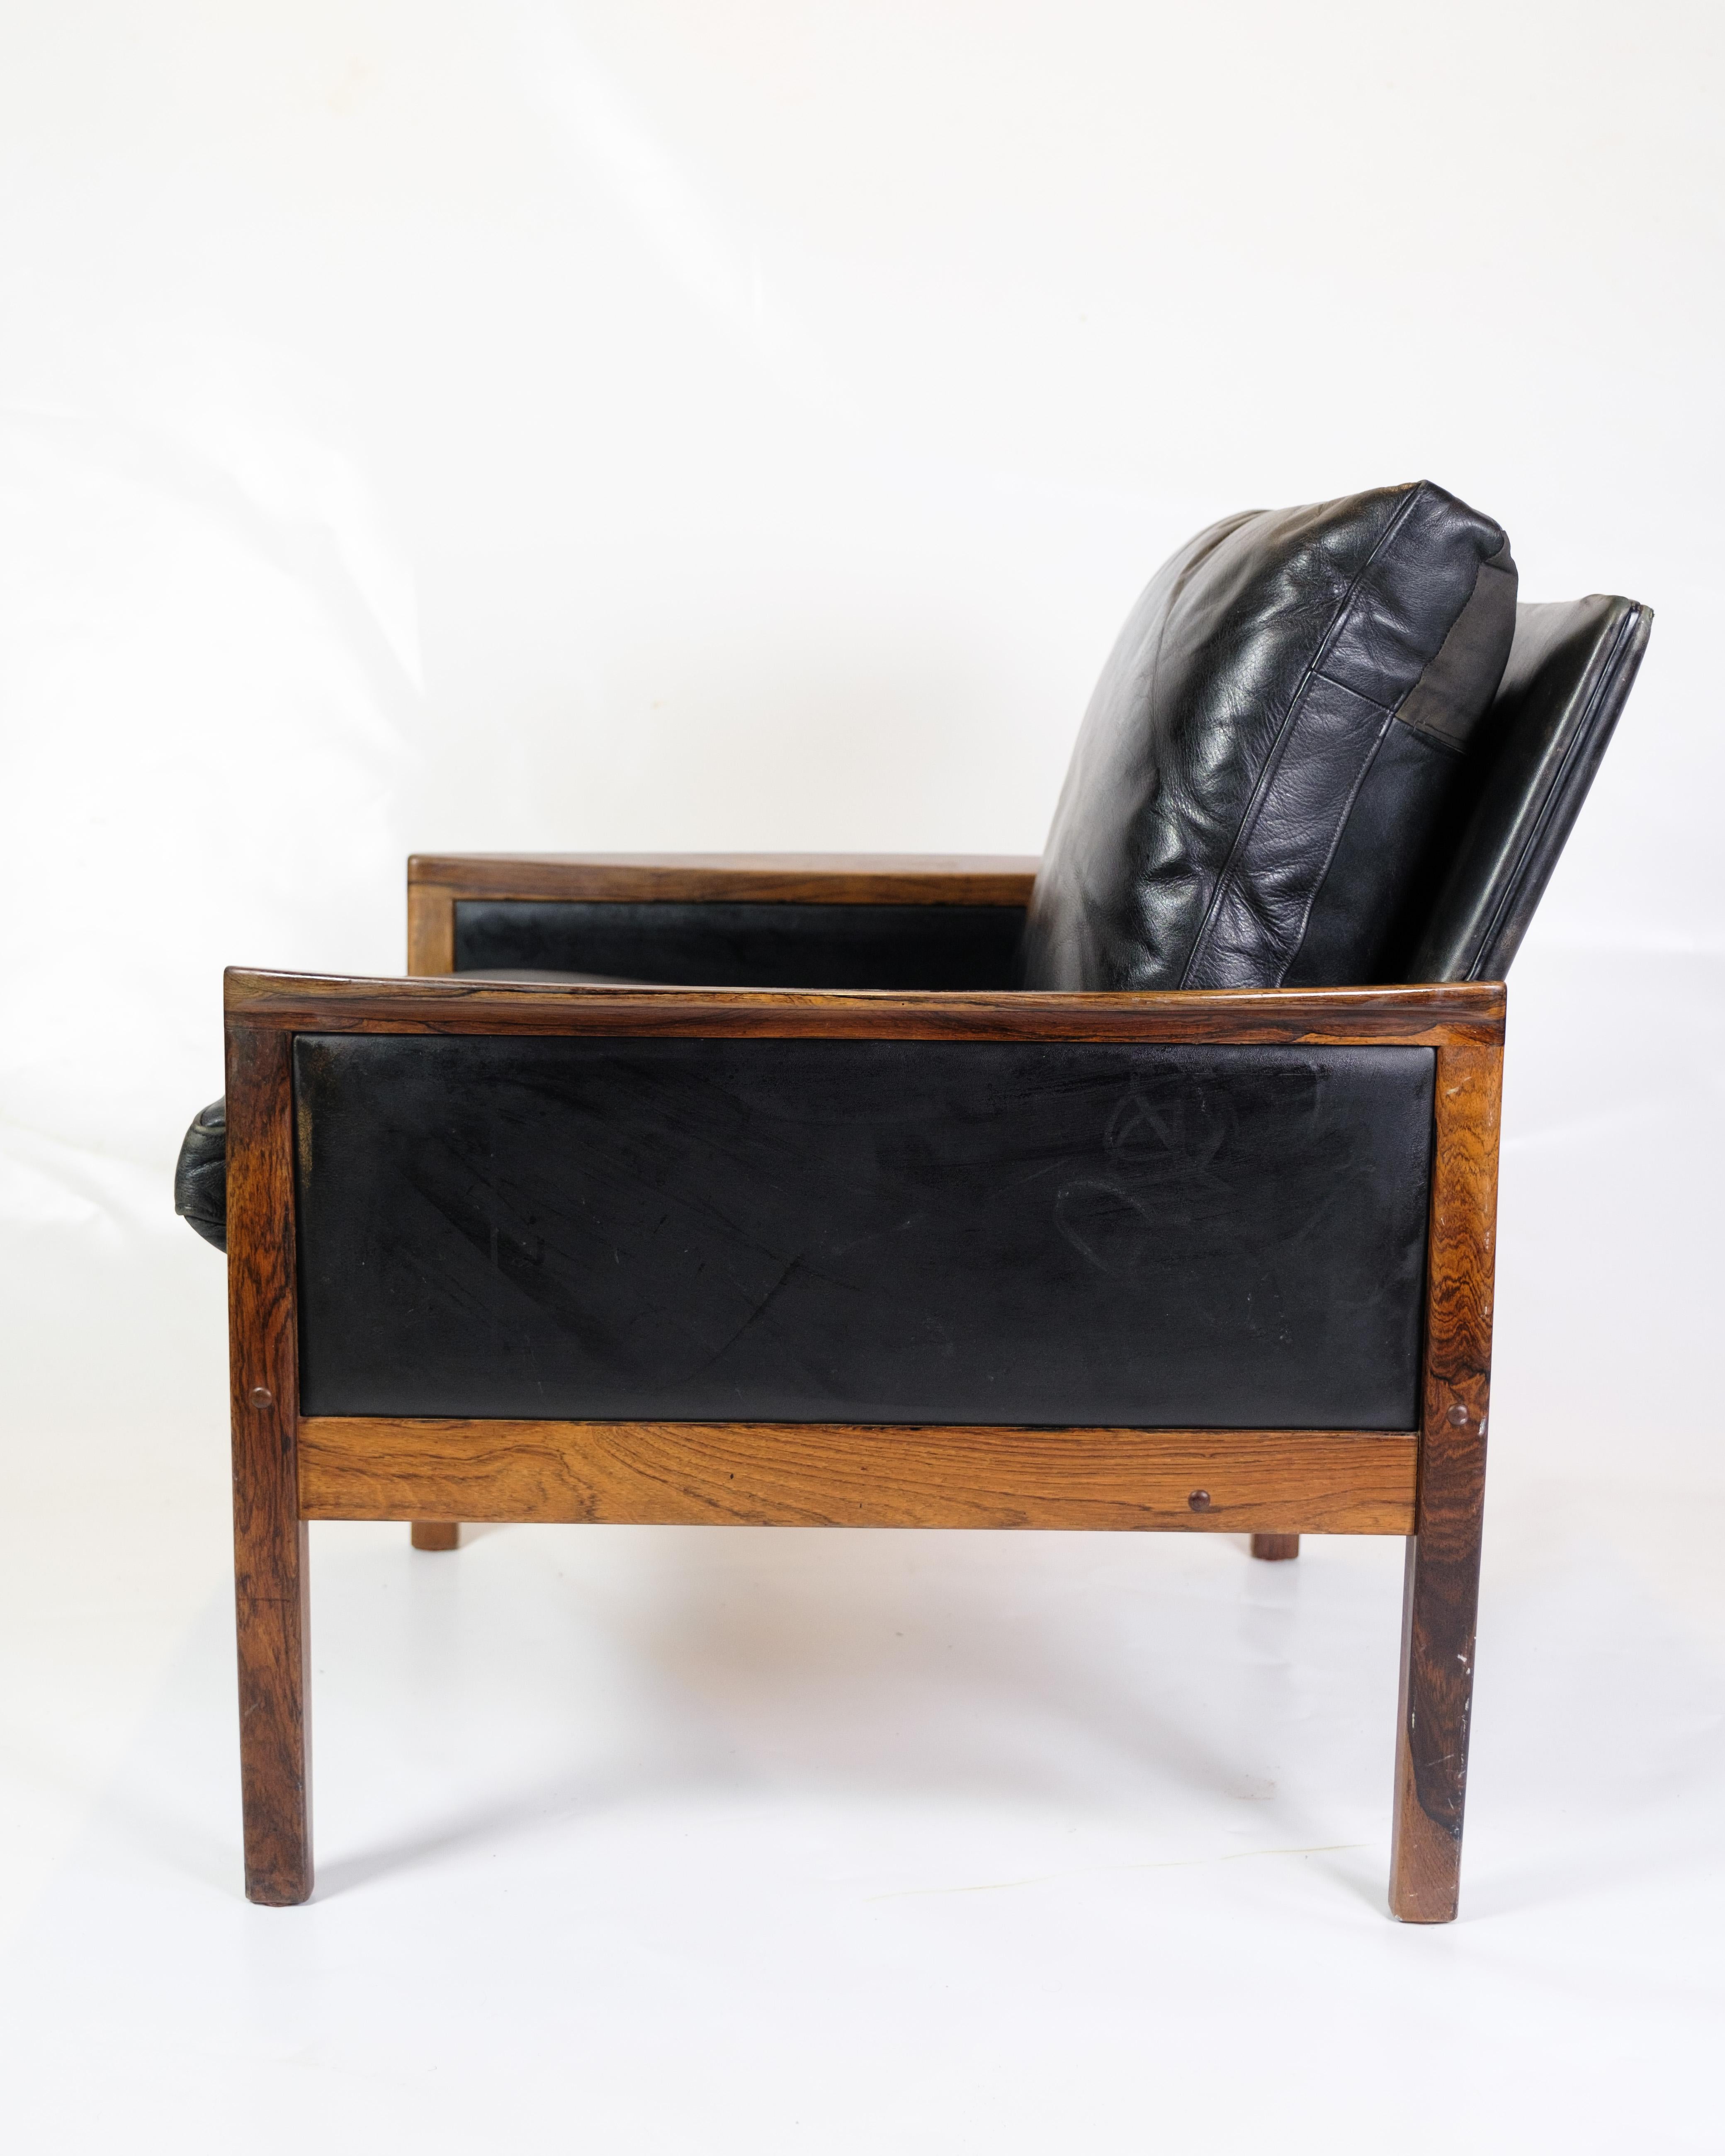 Armchair Made In Rosewood By Hans Olsen Made By Brdr. Juul K. From 1960s In Good Condition For Sale In Lejre, DK